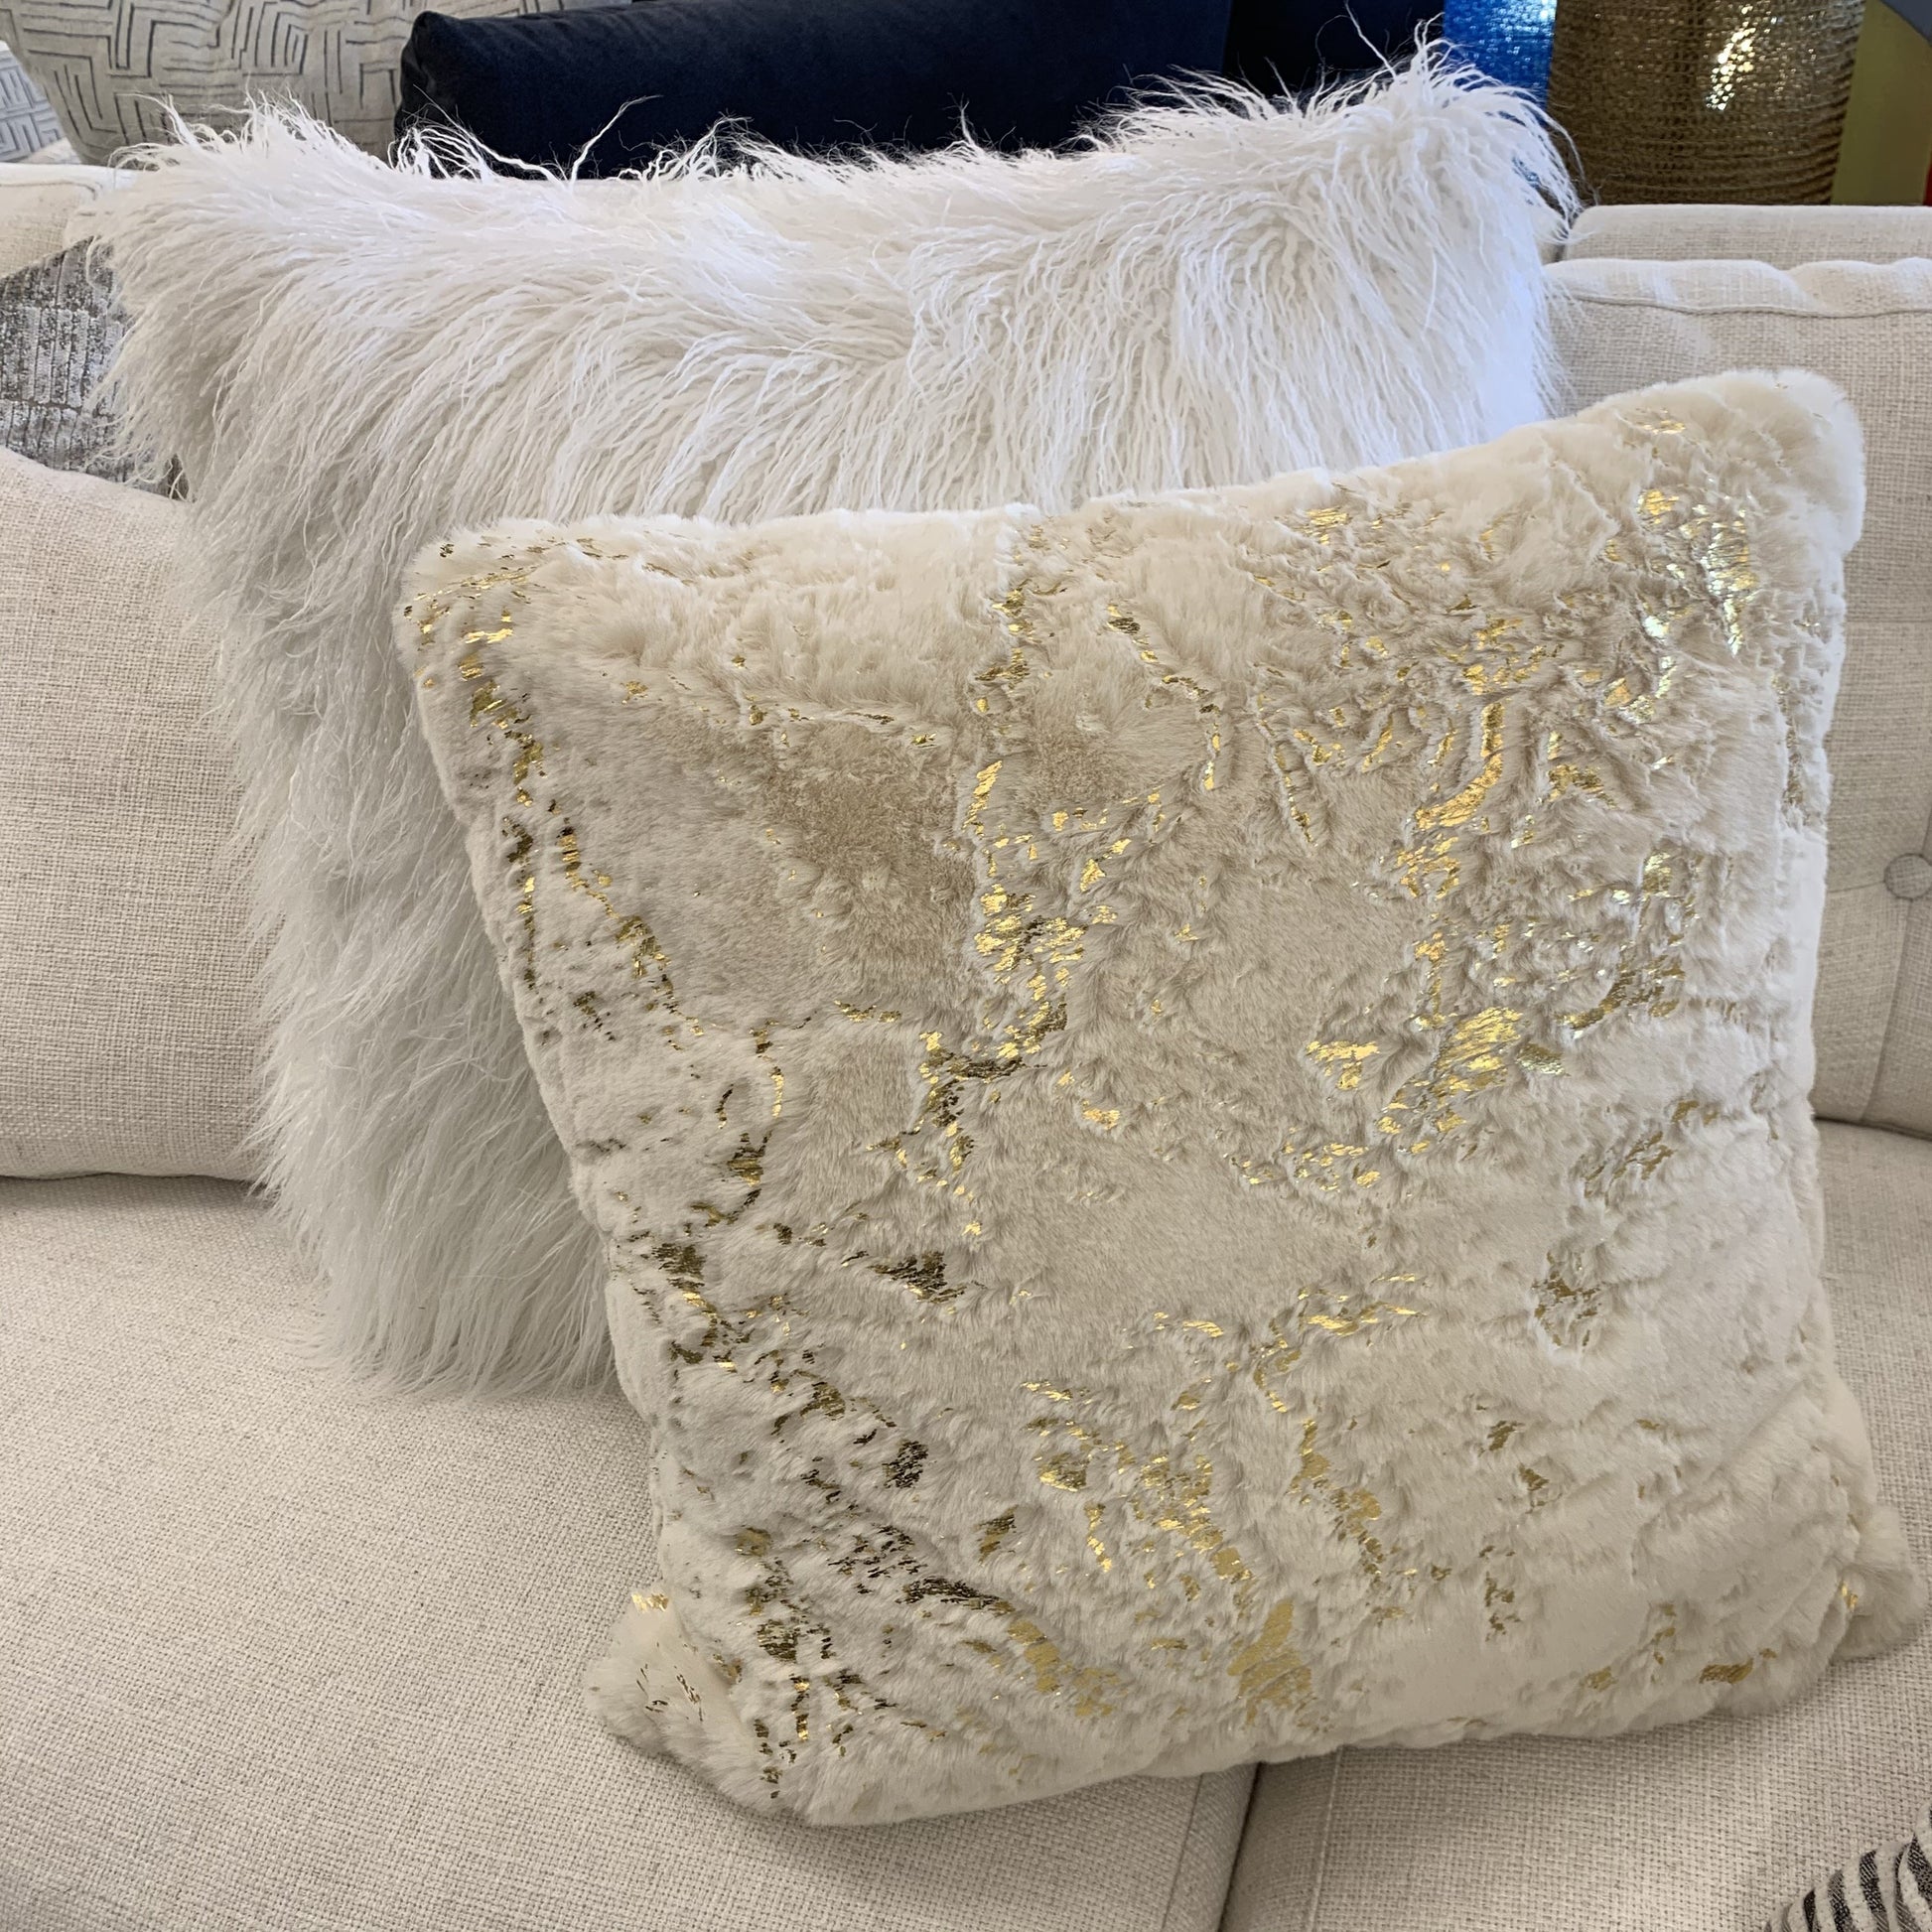 Golden Faux Fur Glow Fluffy Extra Soft Shimmery Foil Illuminating Effect Throw Pillow/Positioner -Metallica Pillow Collection